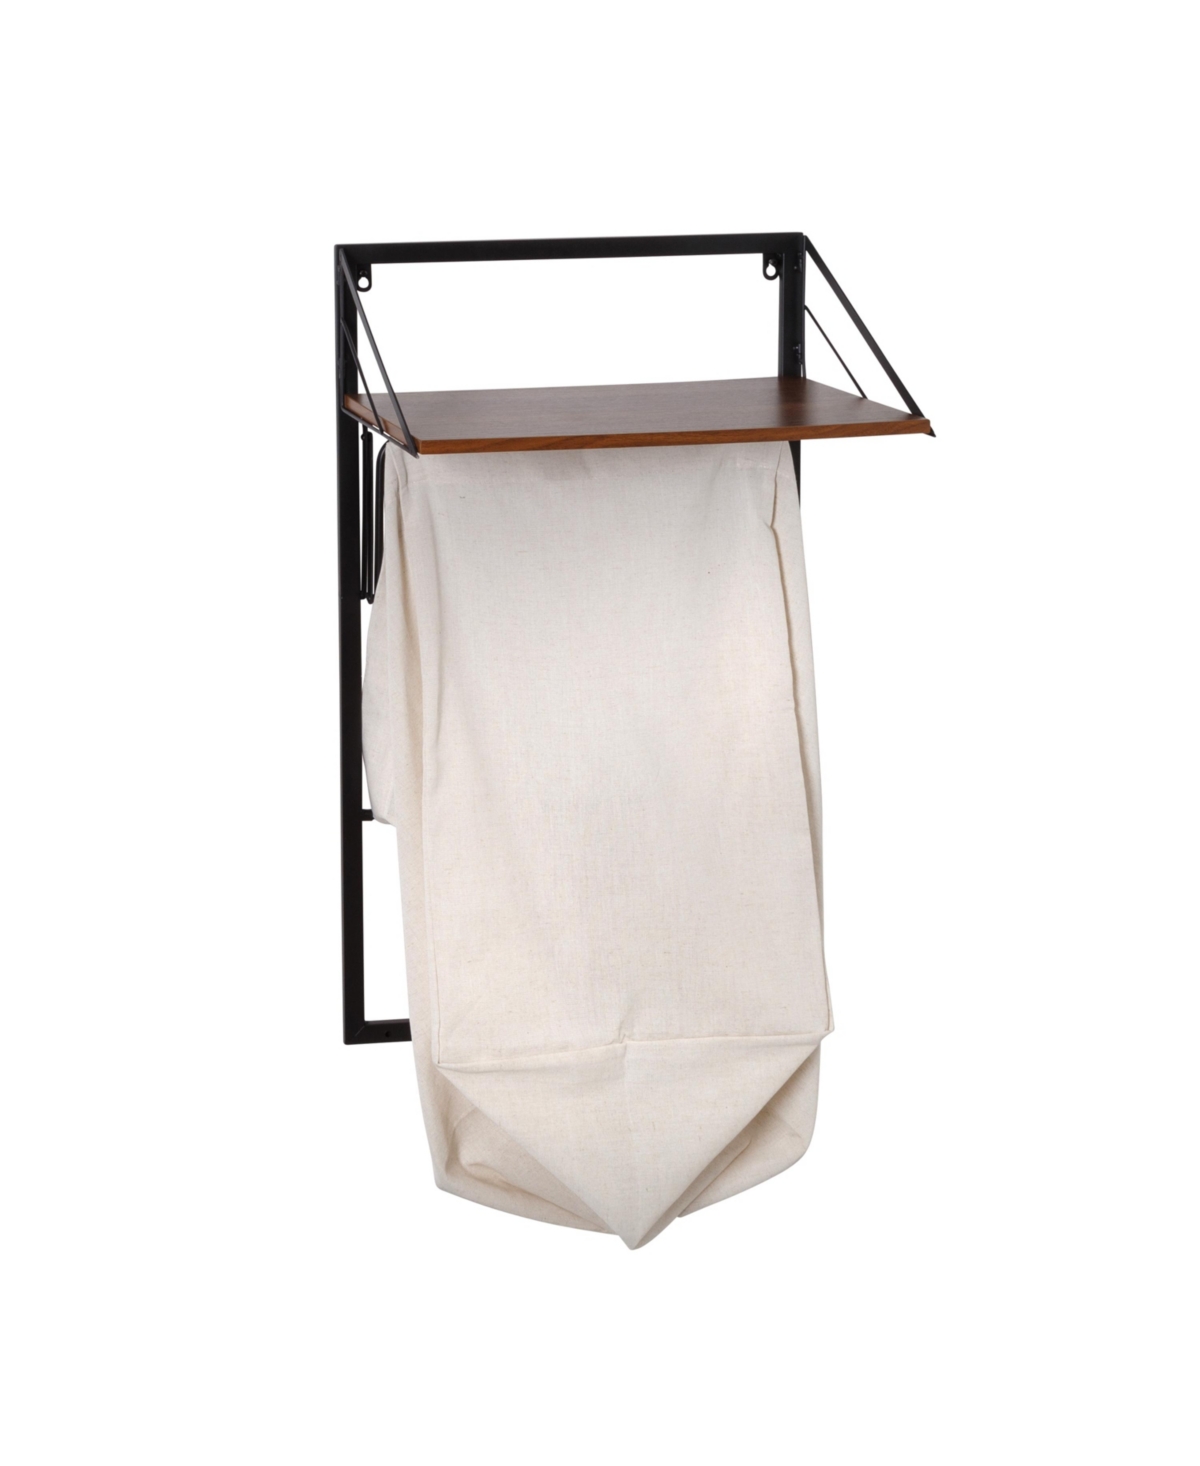 Shop Honey Can Do Collapsible Wall Mounted Clothes Hamper With Laundry Bag And Shelf In Black